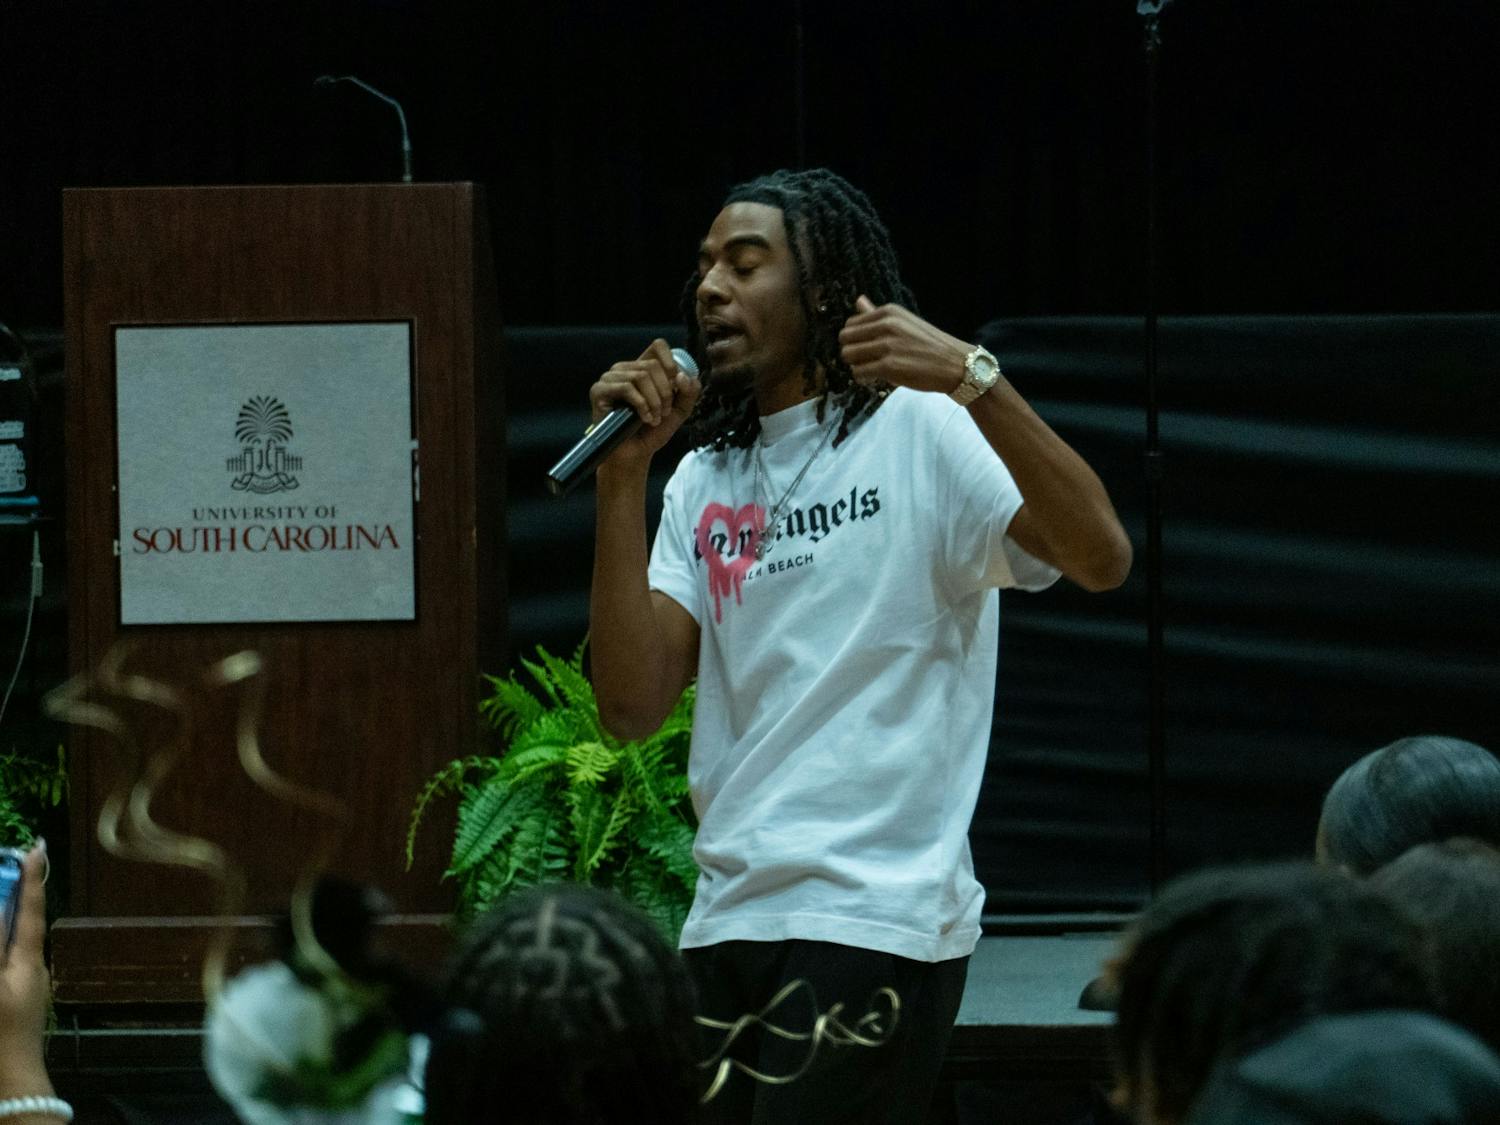 Devin Long entertains the crowd as the second act in the Back II Black talent showcase on Feb. 25, 2022.